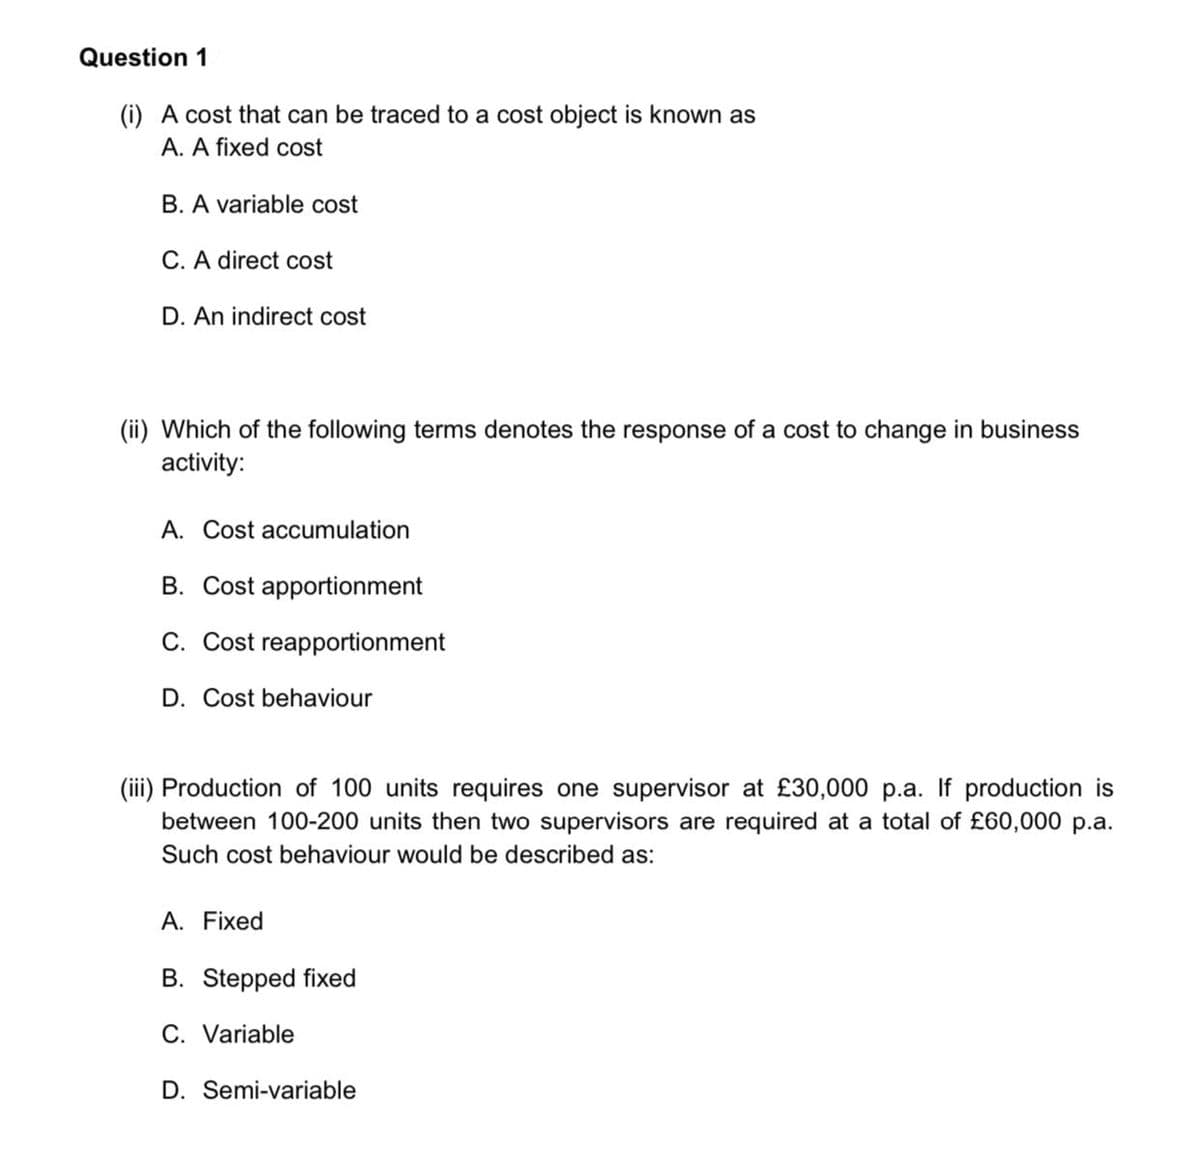 Question 1
(i) A cost that can be traced to a cost object is known as
A. A fixed cost
B. A variable cost
C. A direct cost
D. An indirect cost
(ii) Which of the following terms denotes the response of a cost to change in business
activity:
A. Cost accumulation
B. Cost apportionment
C. Cost reapportionment
D. Cost behaviour
(iii) Production of 100 units requires one supervisor at £30,000 p.a. If production is
between 100-200 units then two supervisors are required at a total of £60,000 p.a.
Such cost behaviour would be described as:
A. Fixed
B. Stepped fixed
C. Variable
D. Semi-variable
